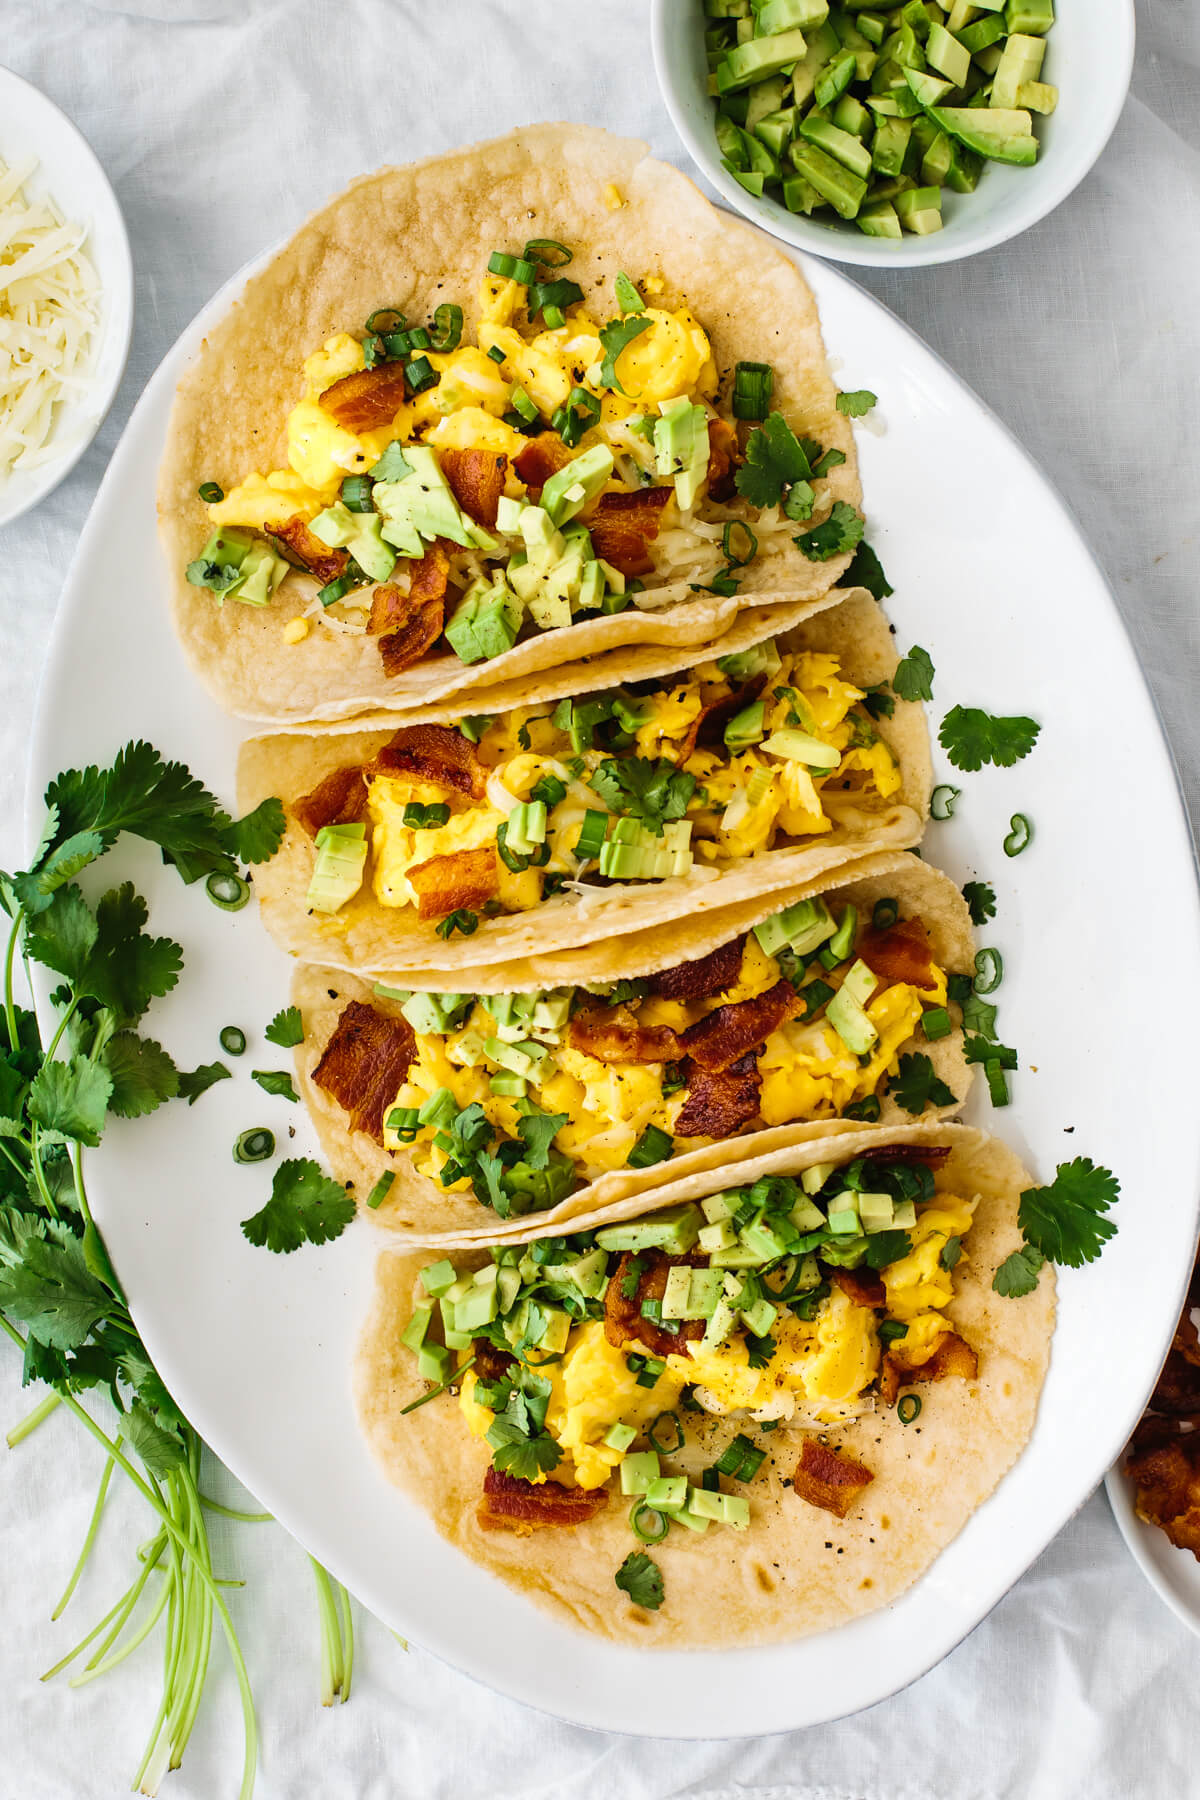 Breakfast tacos on a plate next to cilantro and avocado.